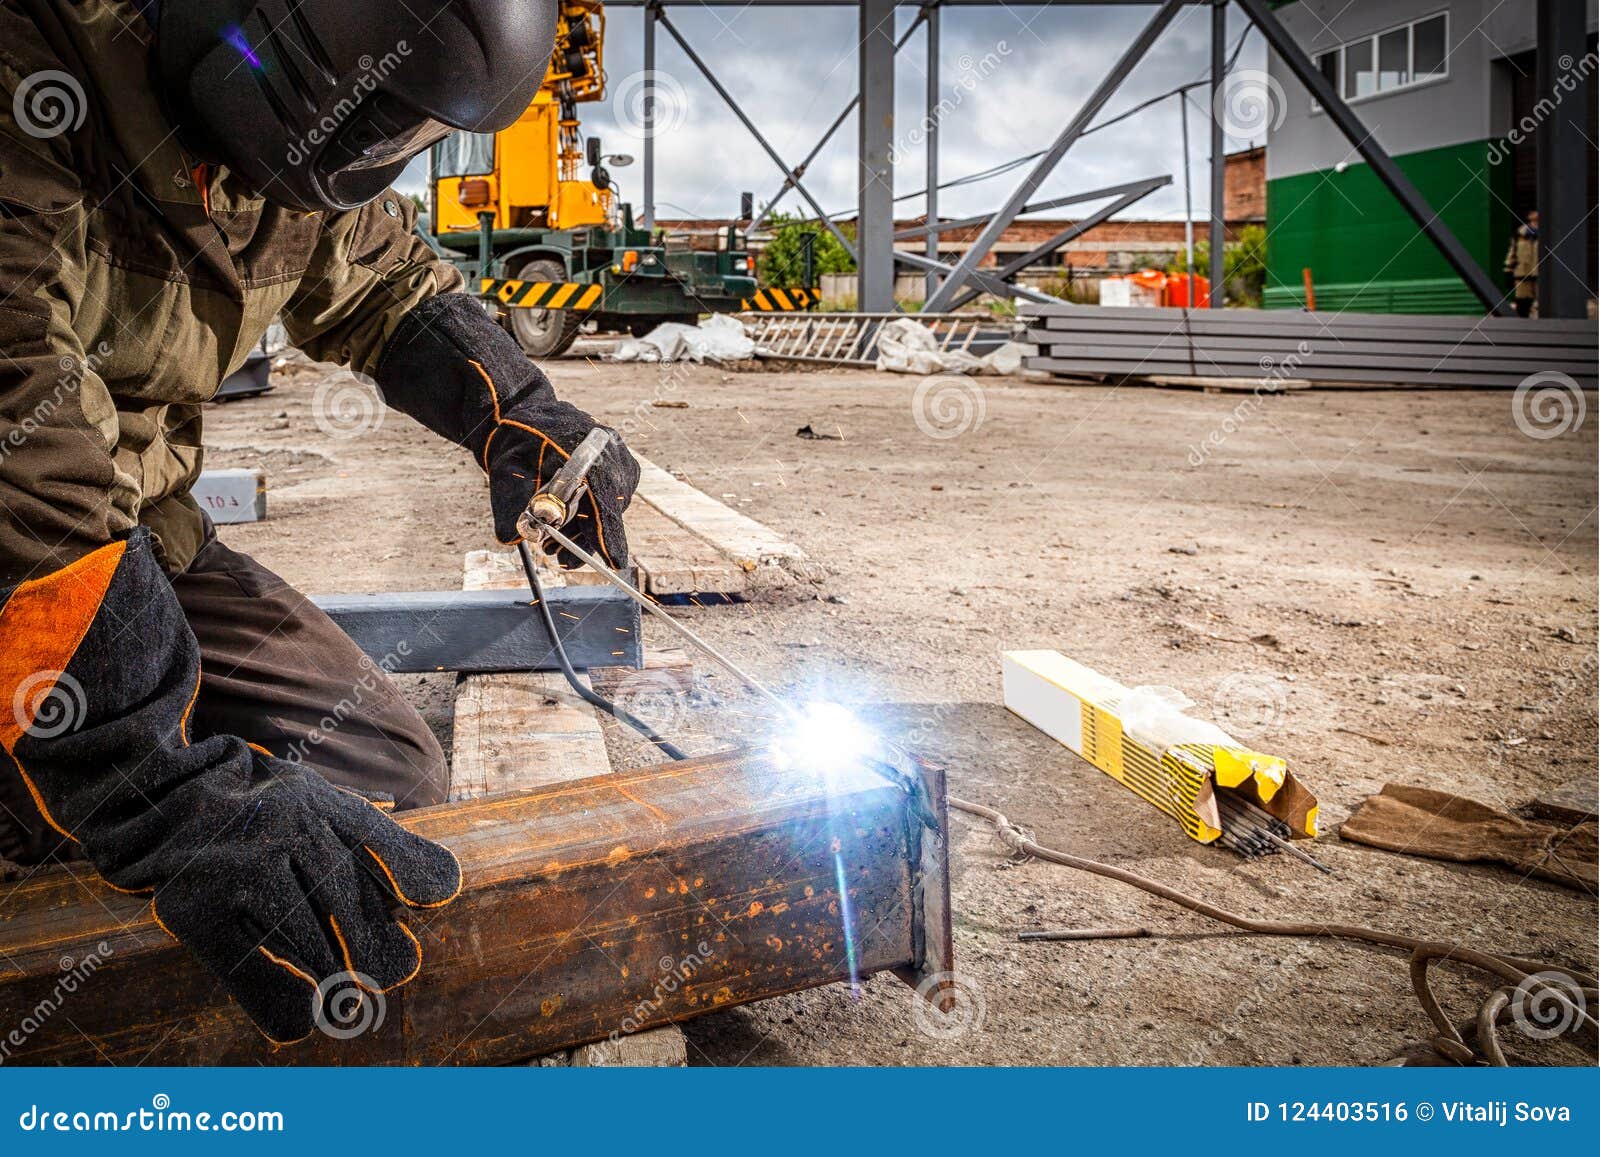 A strong man welder stock photo. Image of bright, protection 124403516